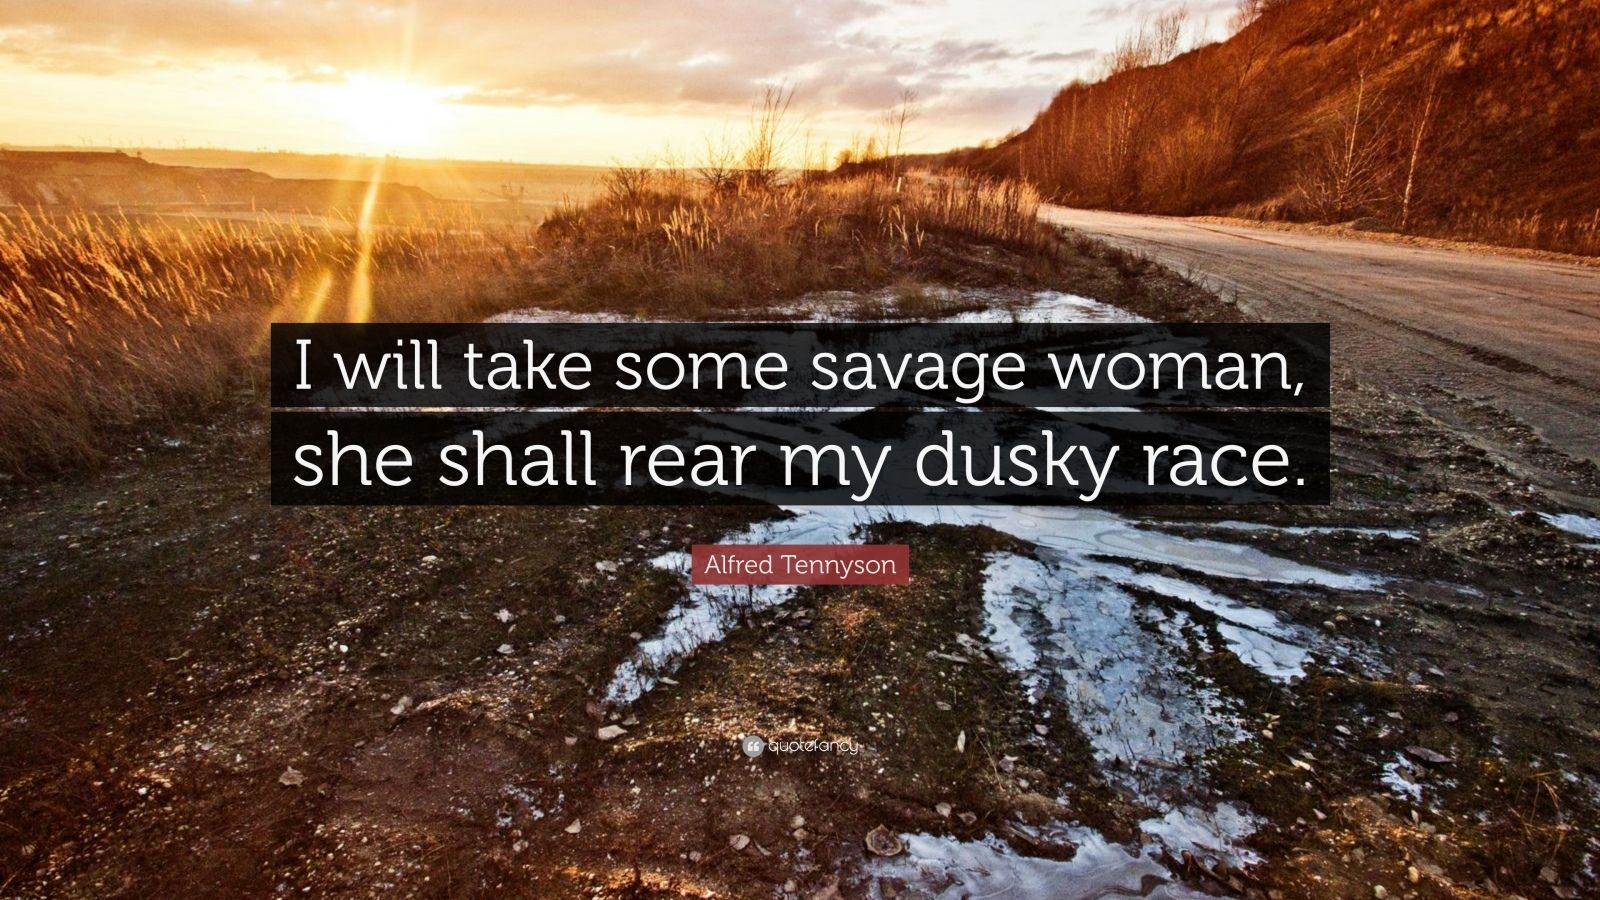 Alfred Tennyson Quote: “I will take some savage woman, she shall rear my dusky race.” (7 wallpaper)